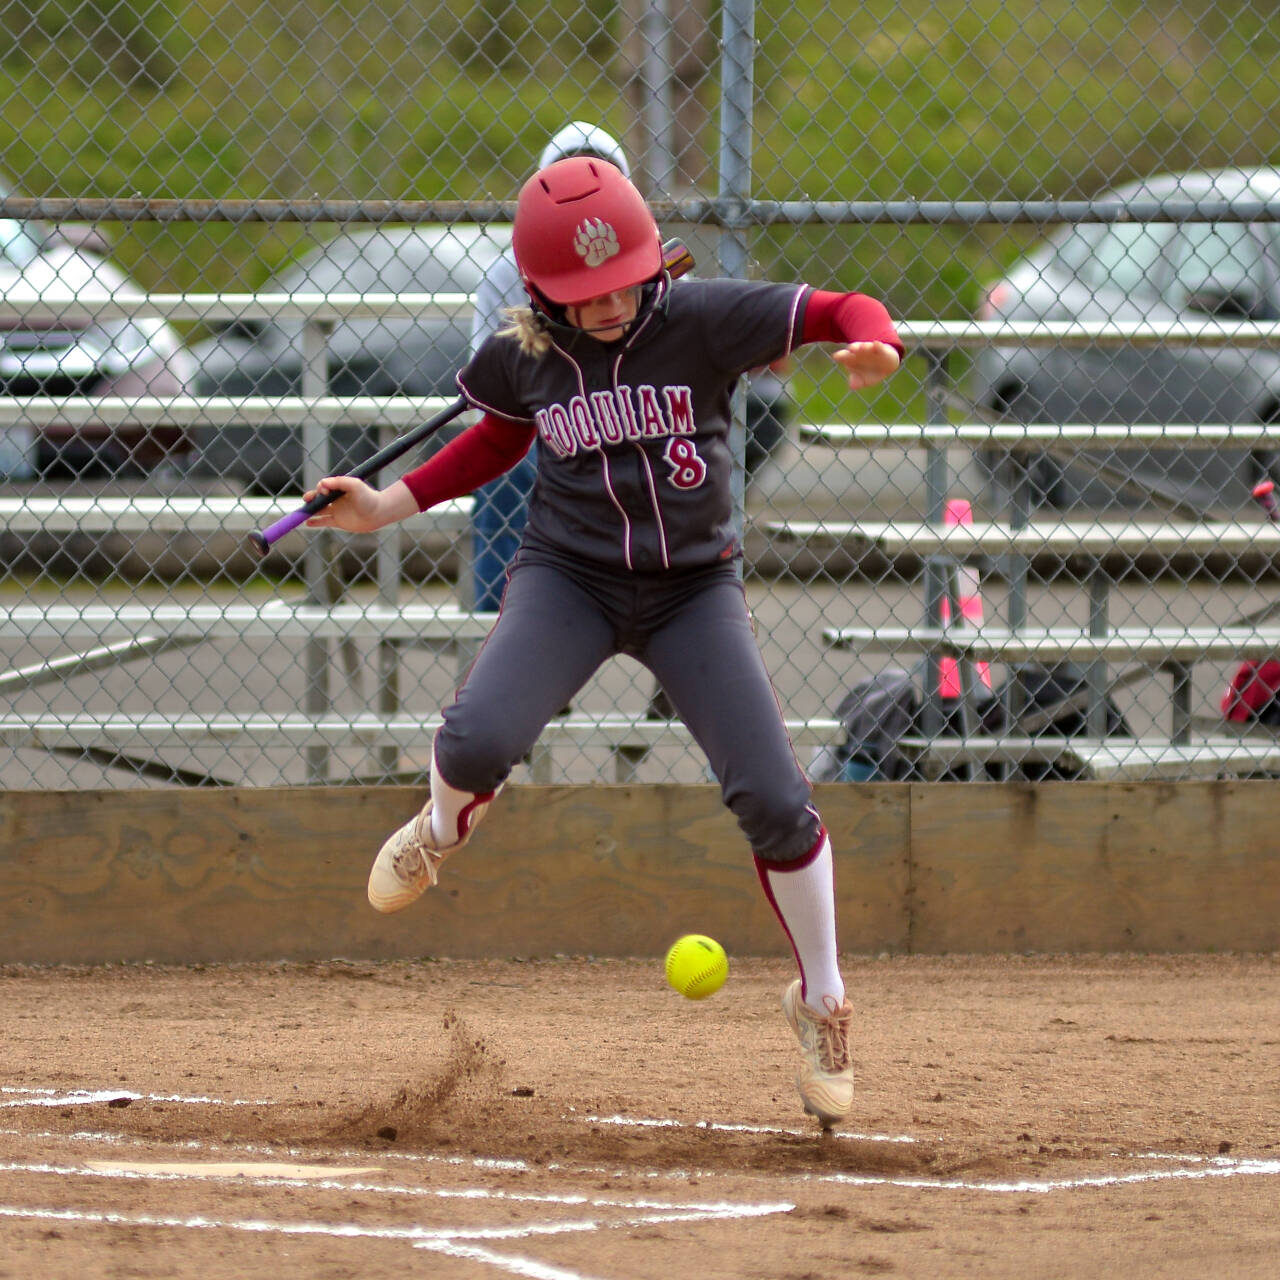 RYAN SPARKS | THE DAILY WORLD Hoquiam’s Graci Bonney-Spradlin jumps out of the way of a pitch during a doubleheader against the Eatonville Cruisers on Tuesday in Hoquiam.